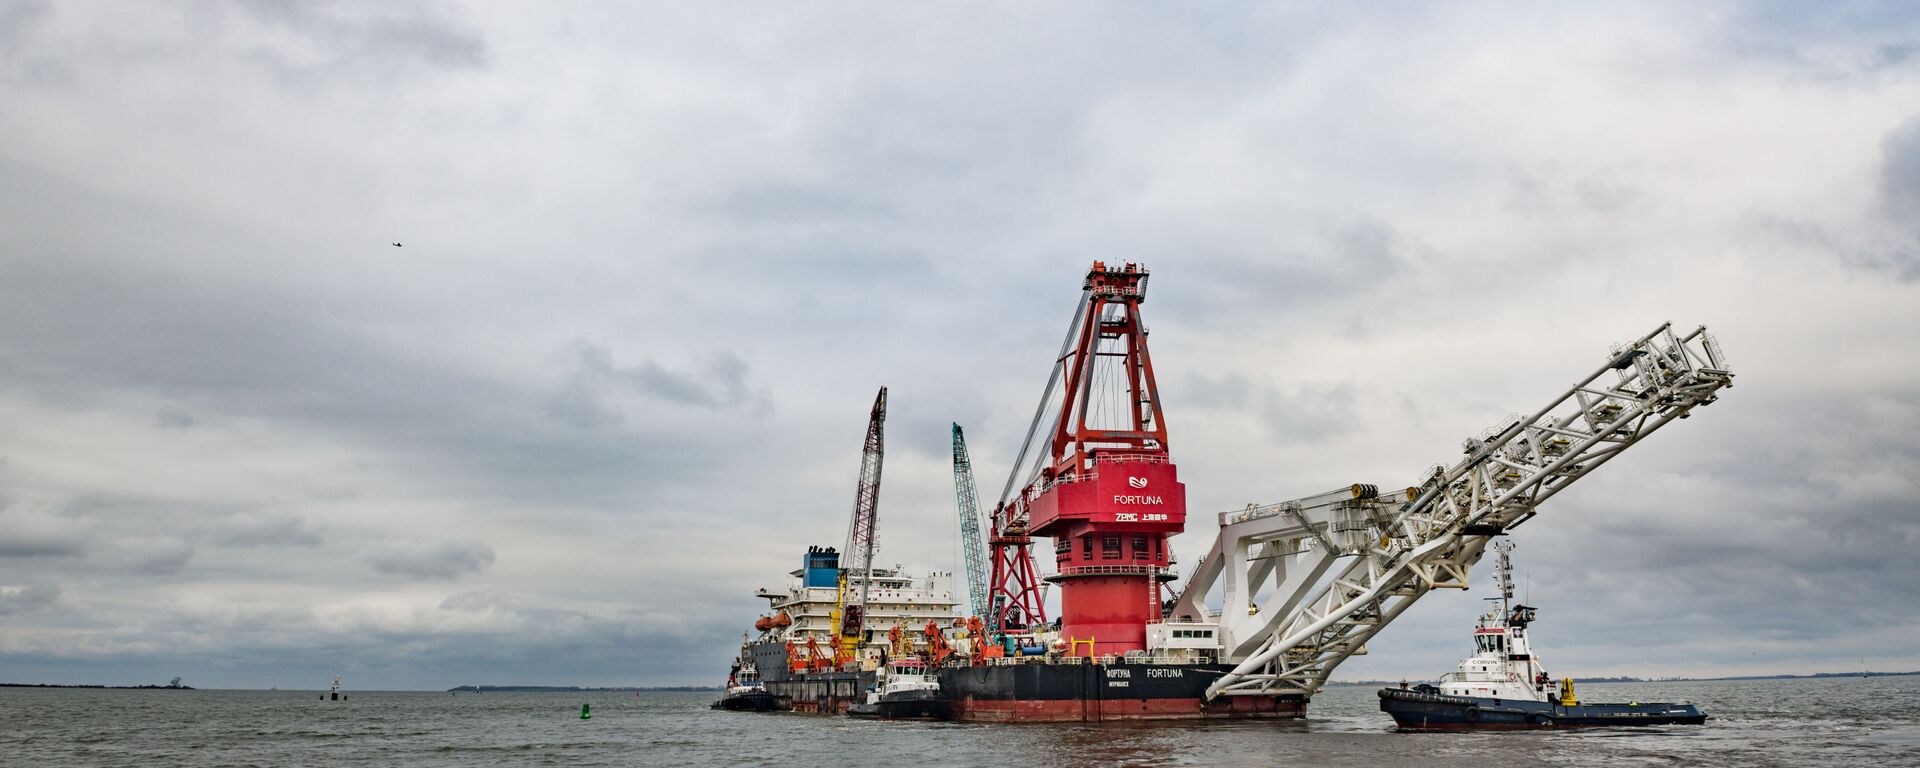 Pipe-laying vessel Fortuna leaves the port of Wismar to work on Nord Stream 2 construction - Sputnik International, 1920, 05.07.2021